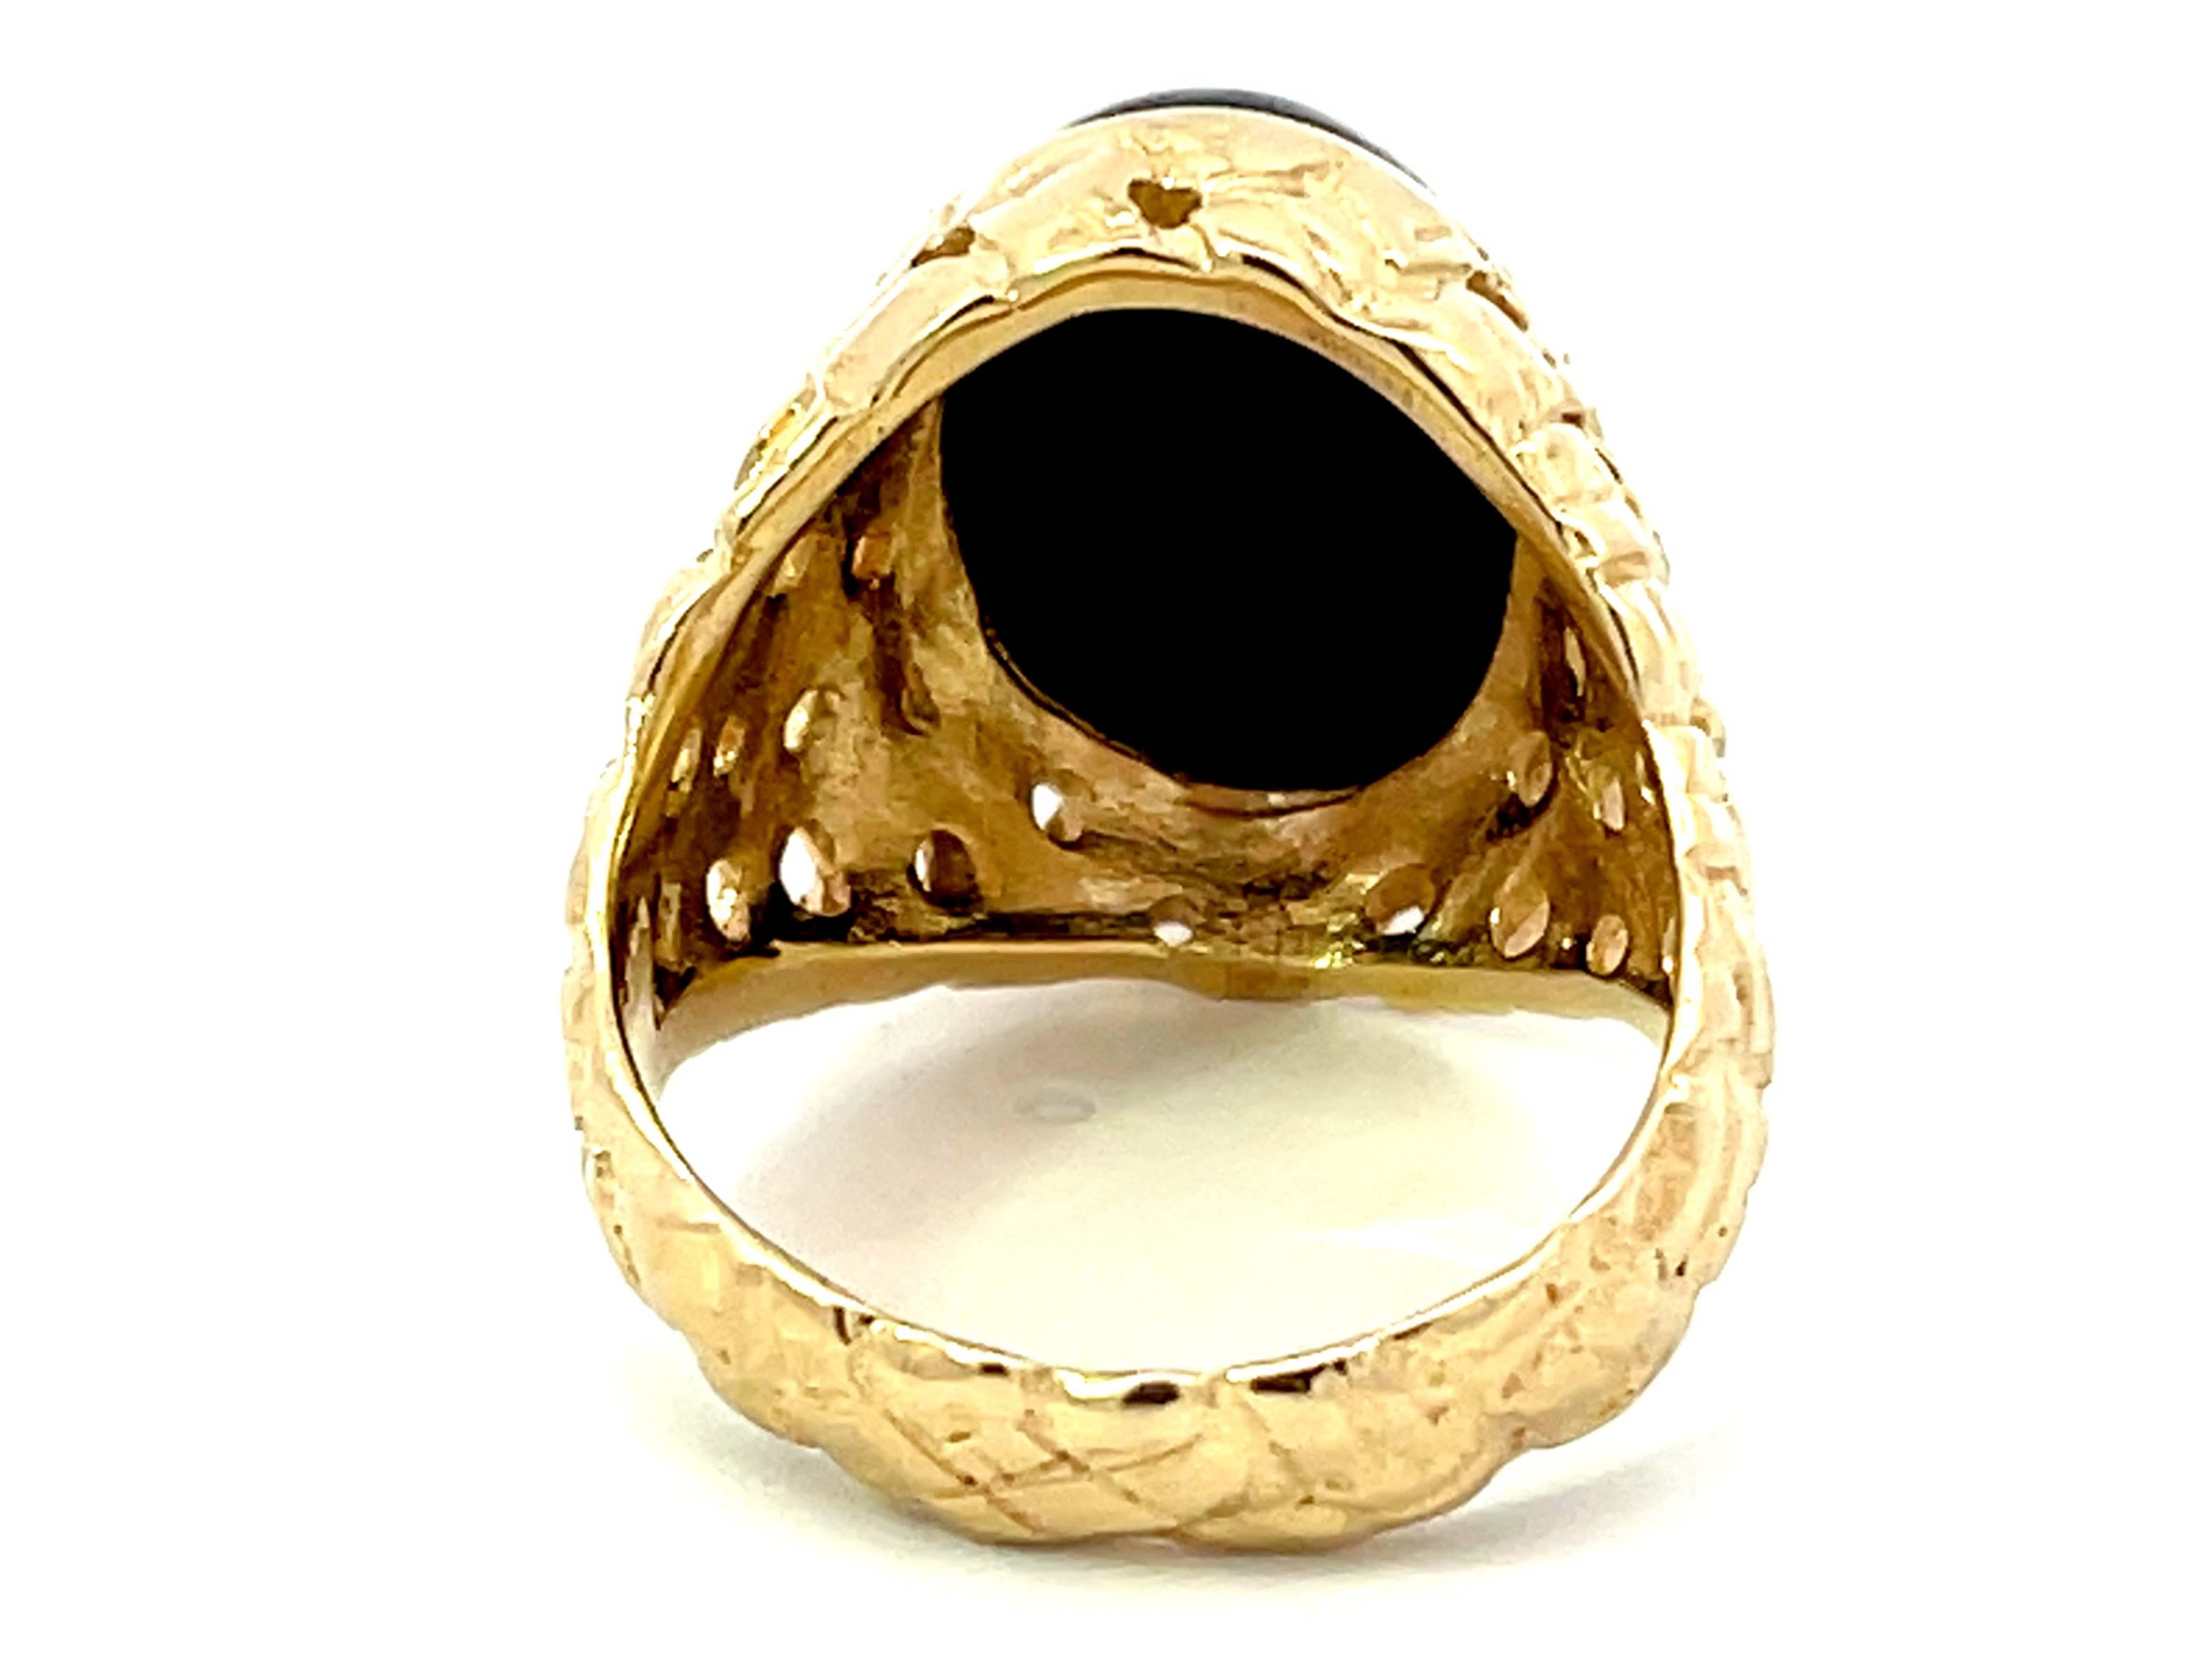 Black Oval Onyx Cabochon Ring in 14k Yellow Gold In Excellent Condition For Sale In Honolulu, HI